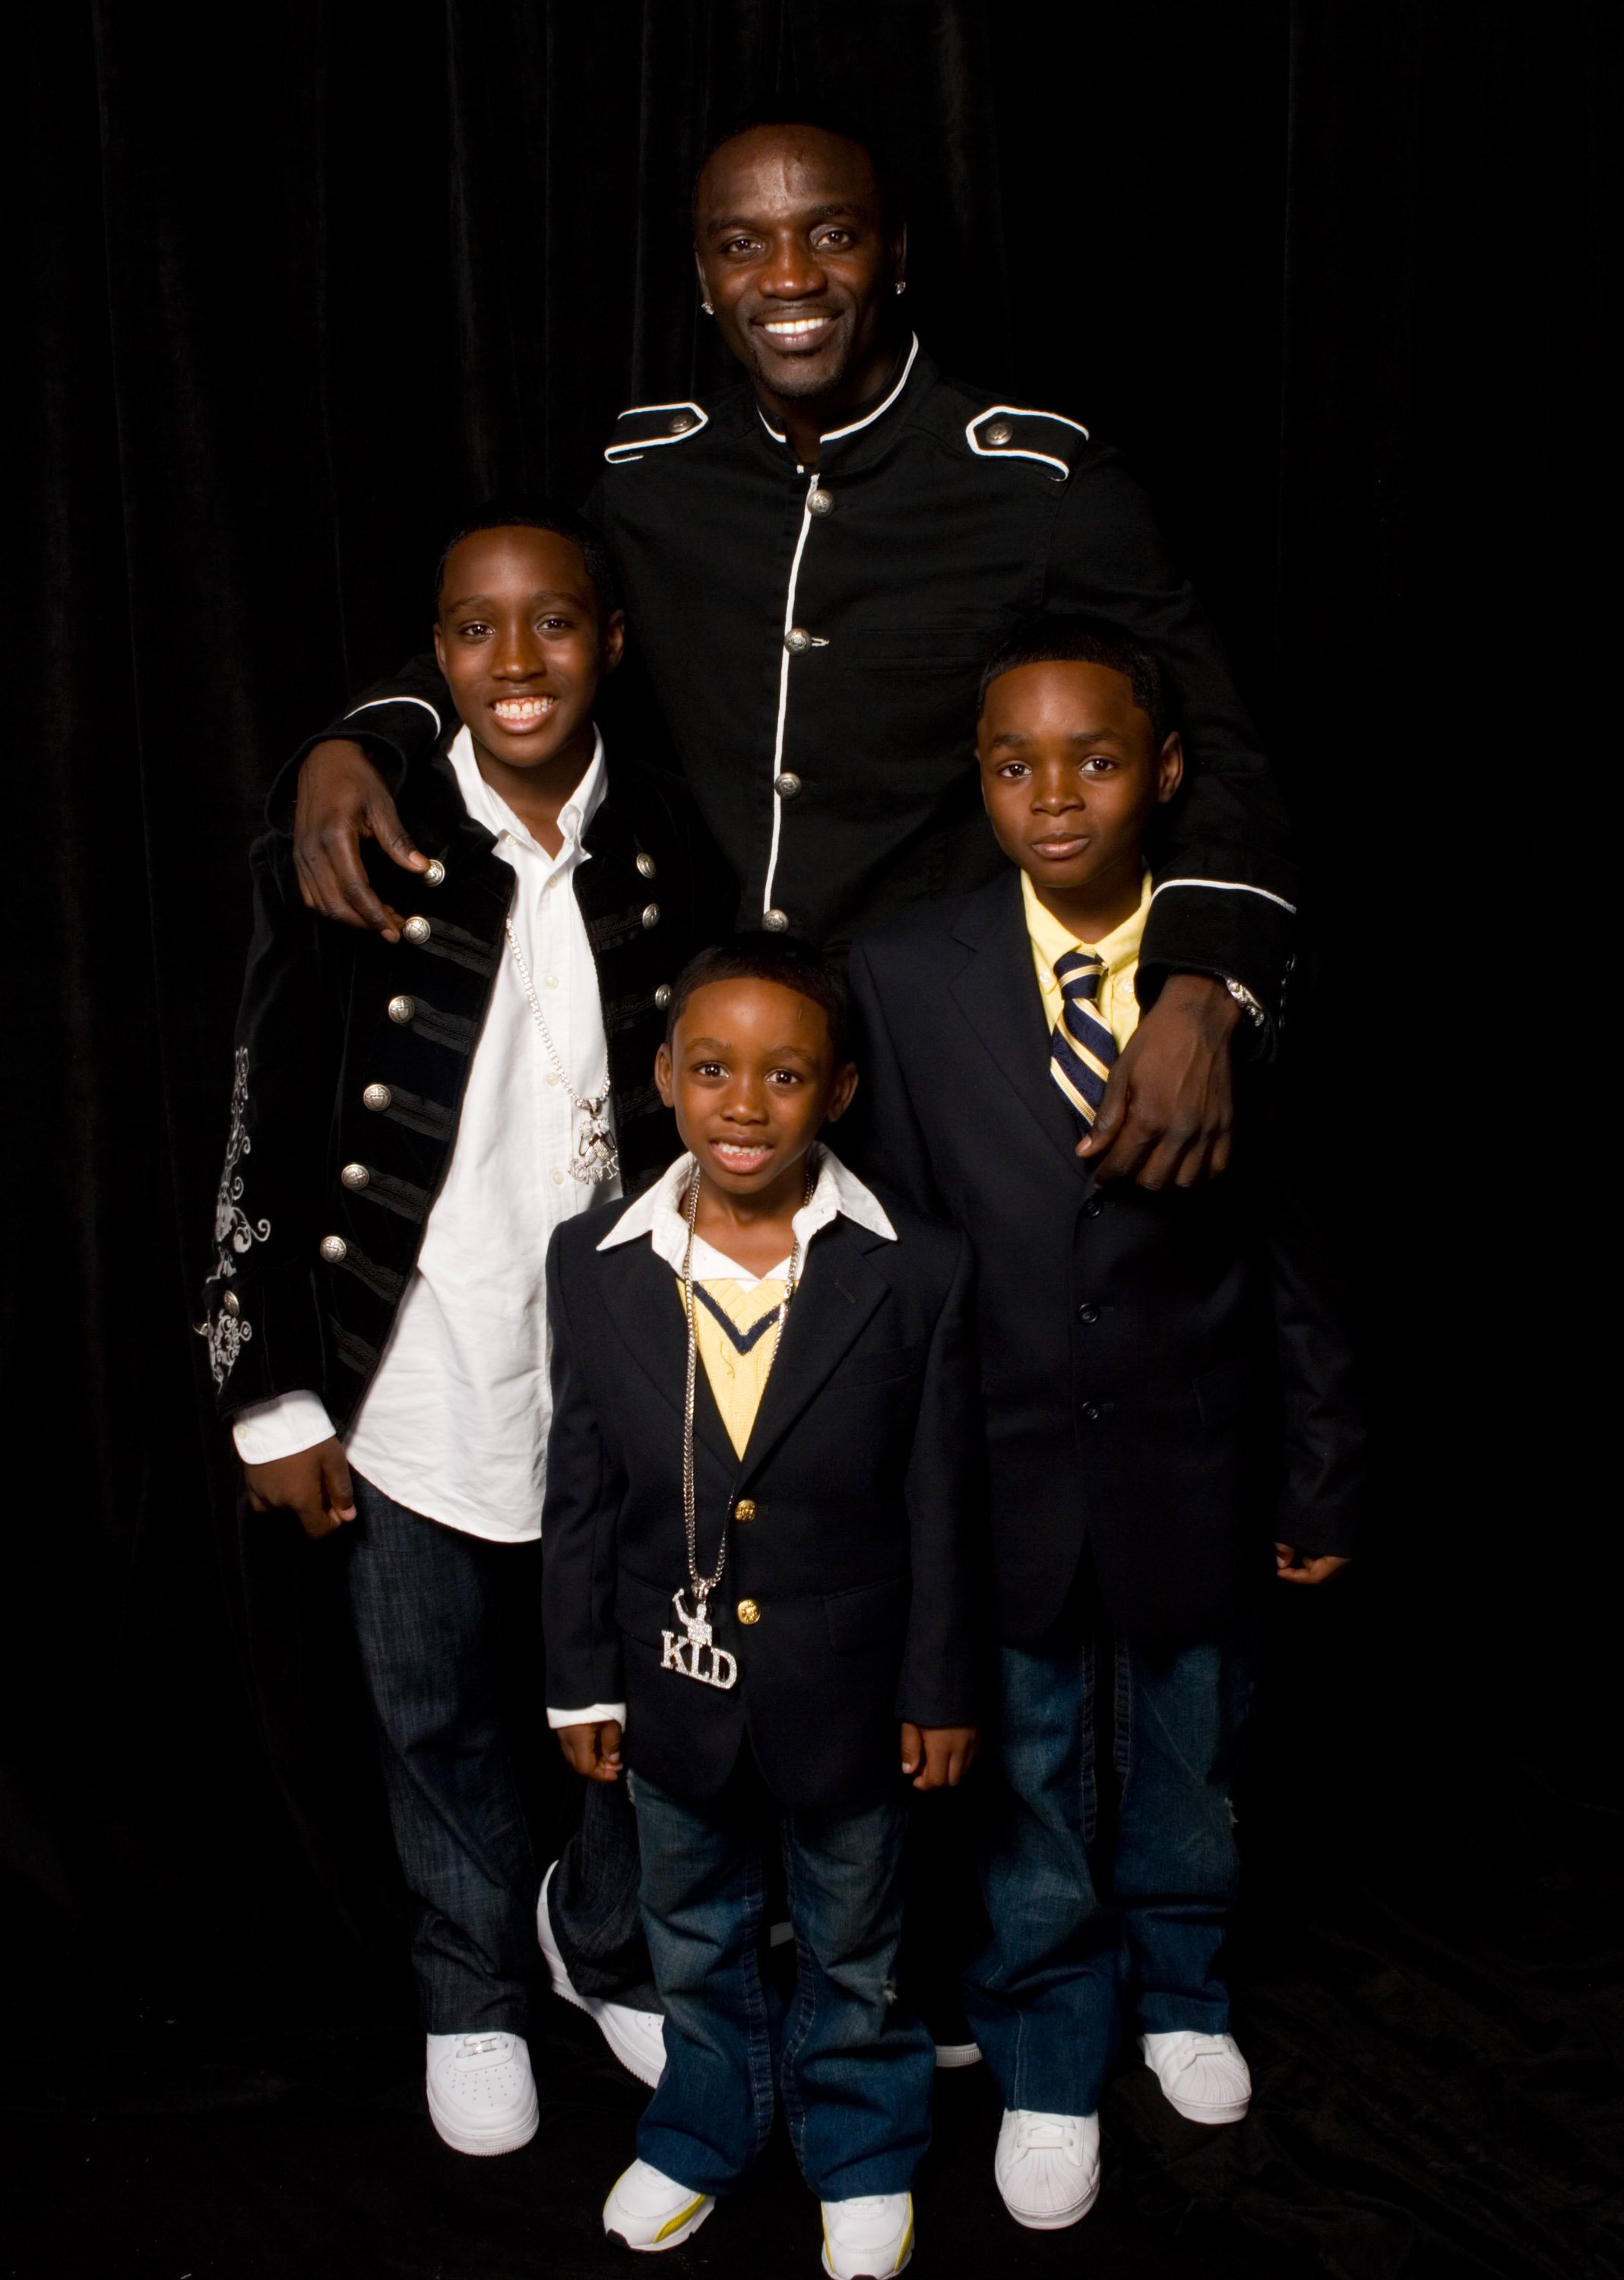 Akon with his sons during the BET Awards 2007 at Shrine Auditorium in Los Angeles, California, on June 26, 2007. | Source: Getty Images